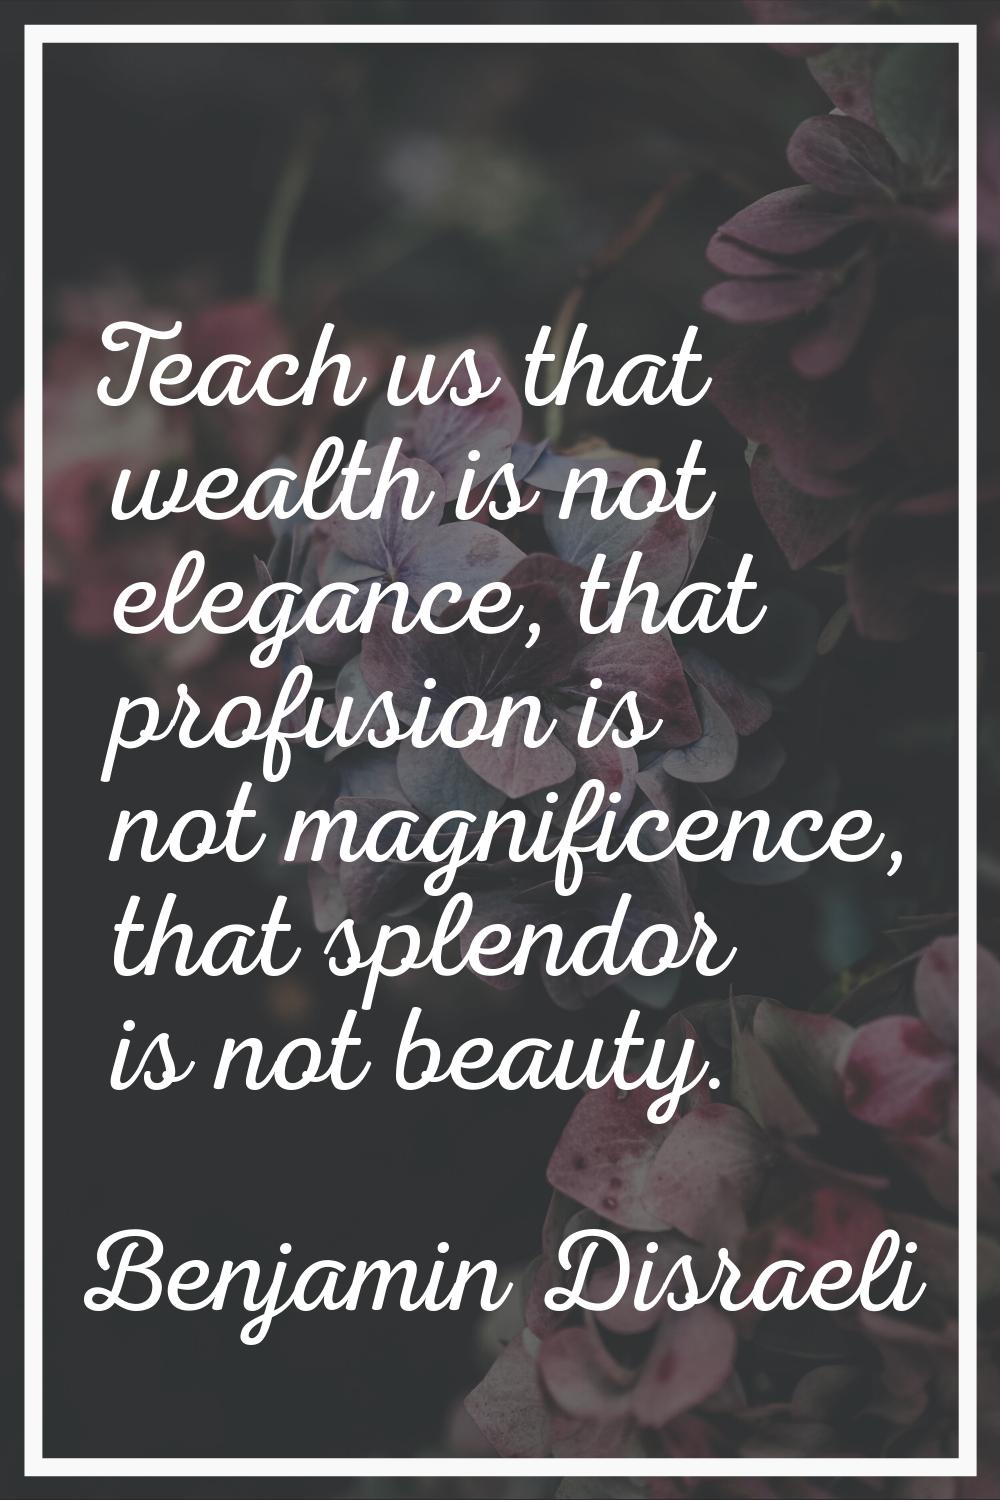 Teach us that wealth is not elegance, that profusion is not magnificence, that splendor is not beau